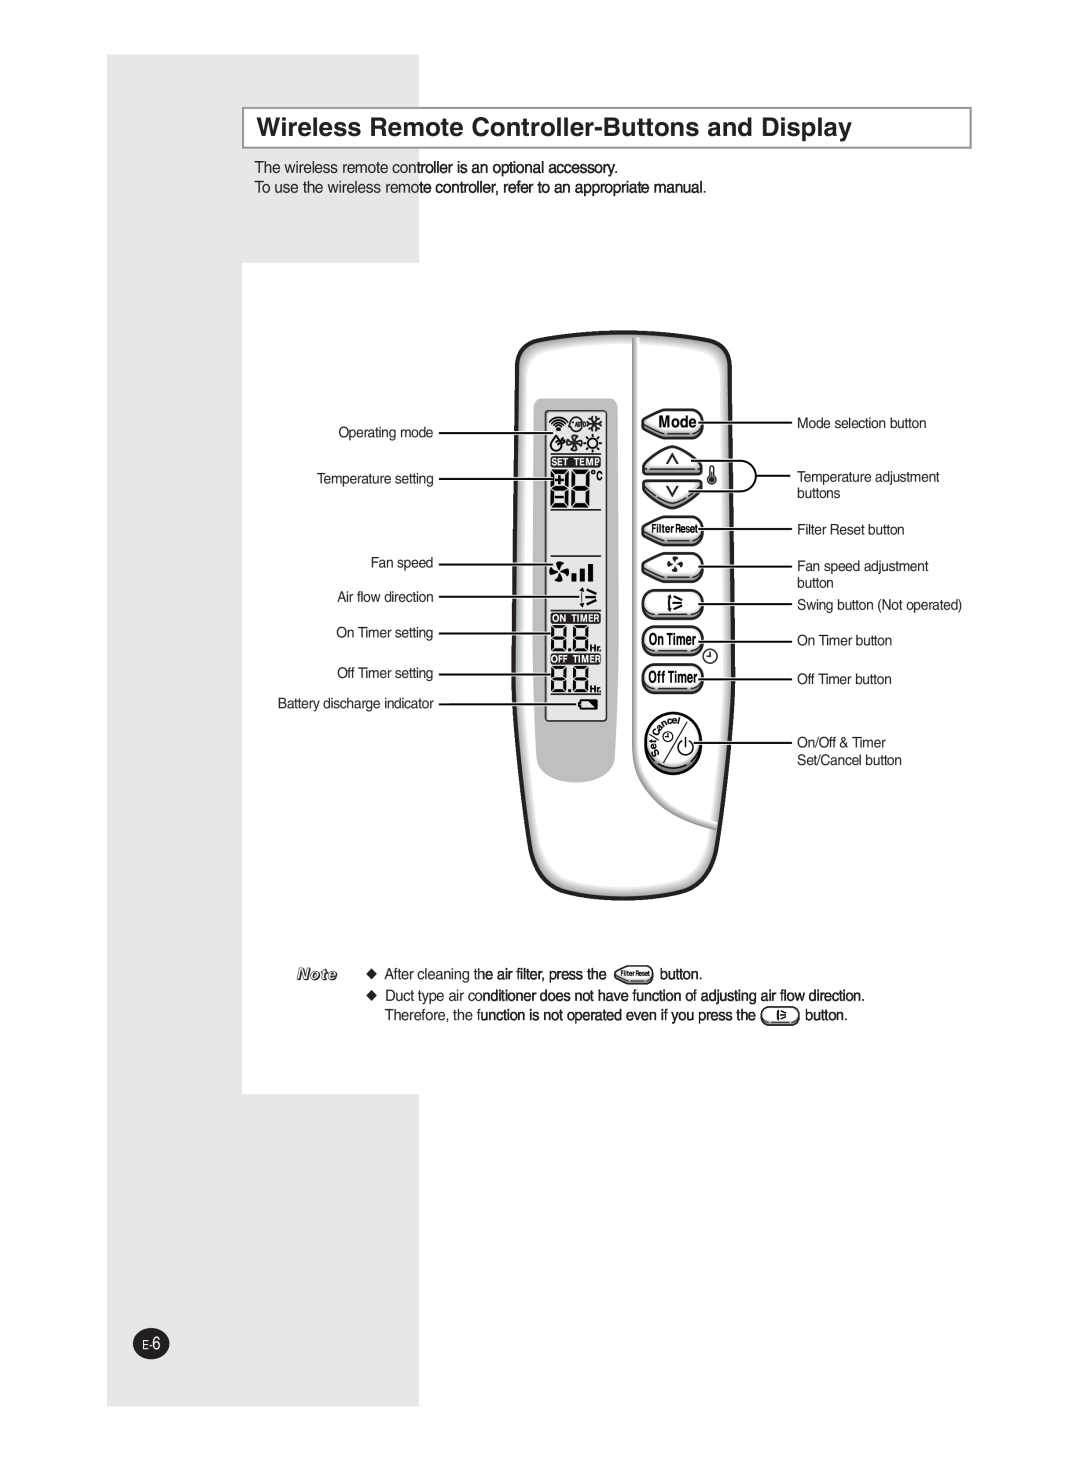 Samsung EH070CAV, EH052CAV, EH035CAV, UH070CAV, UH052CAV, UH035CAV user manual Wireless Remote Controller-Buttonsand Display 